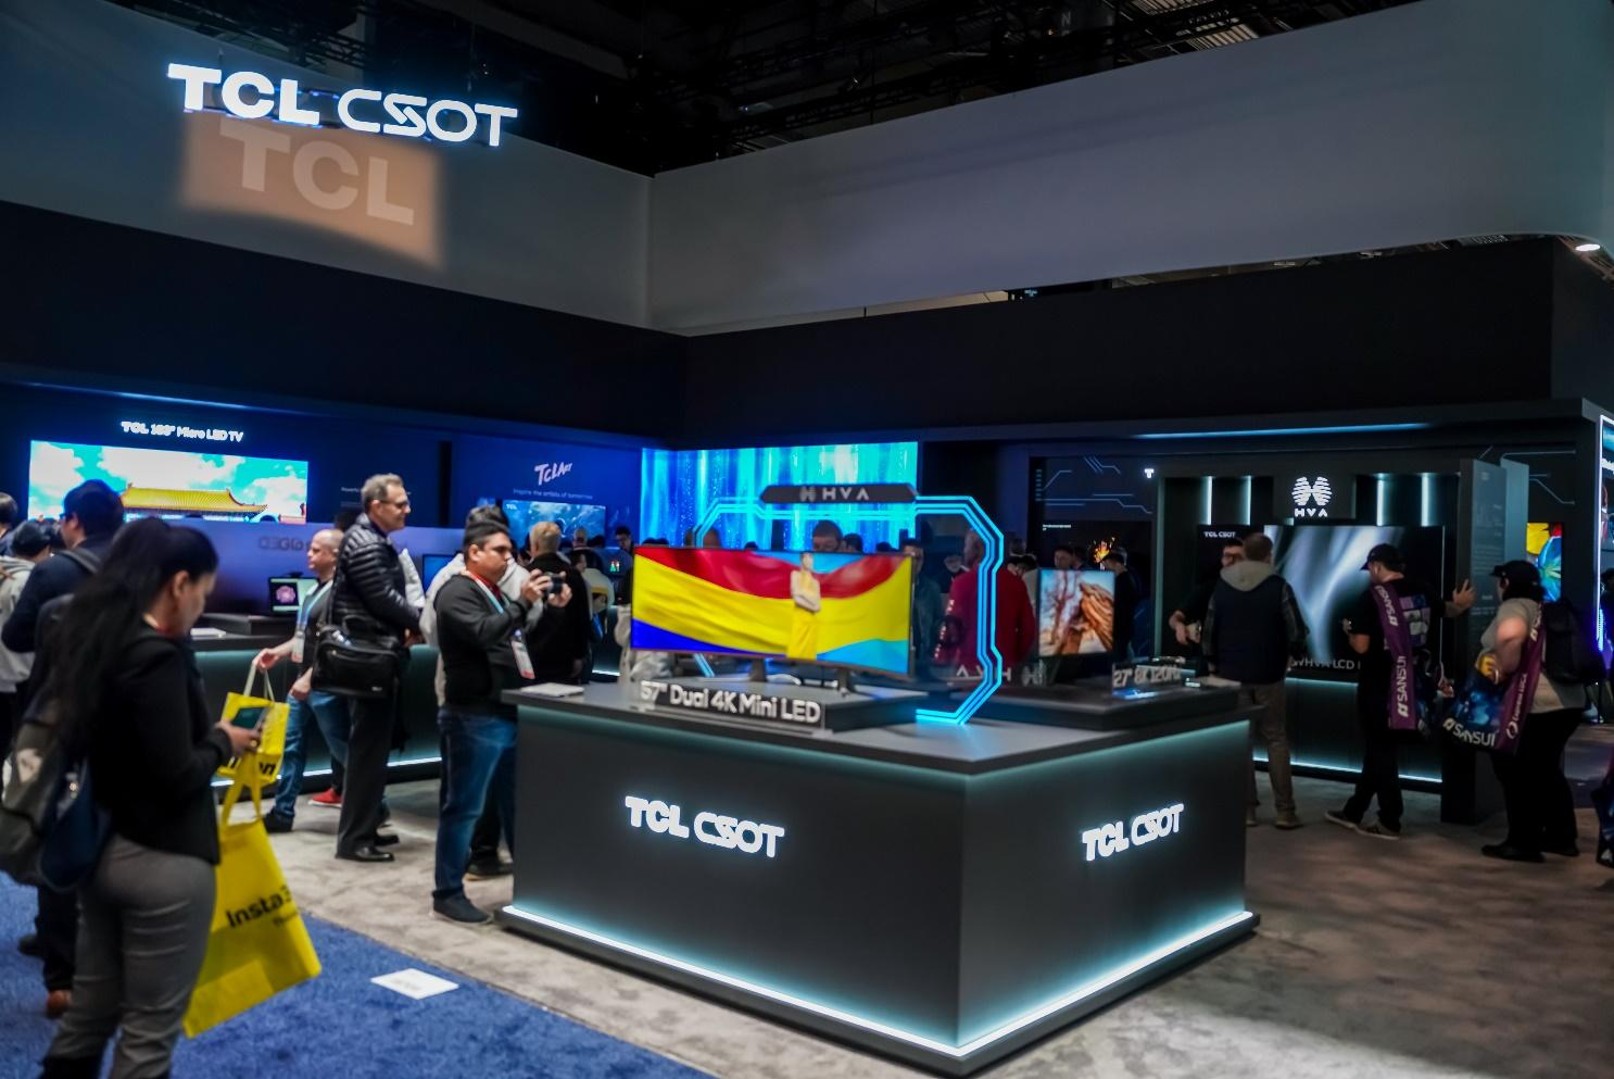 tcl csot booth showing ultrawide gaming display